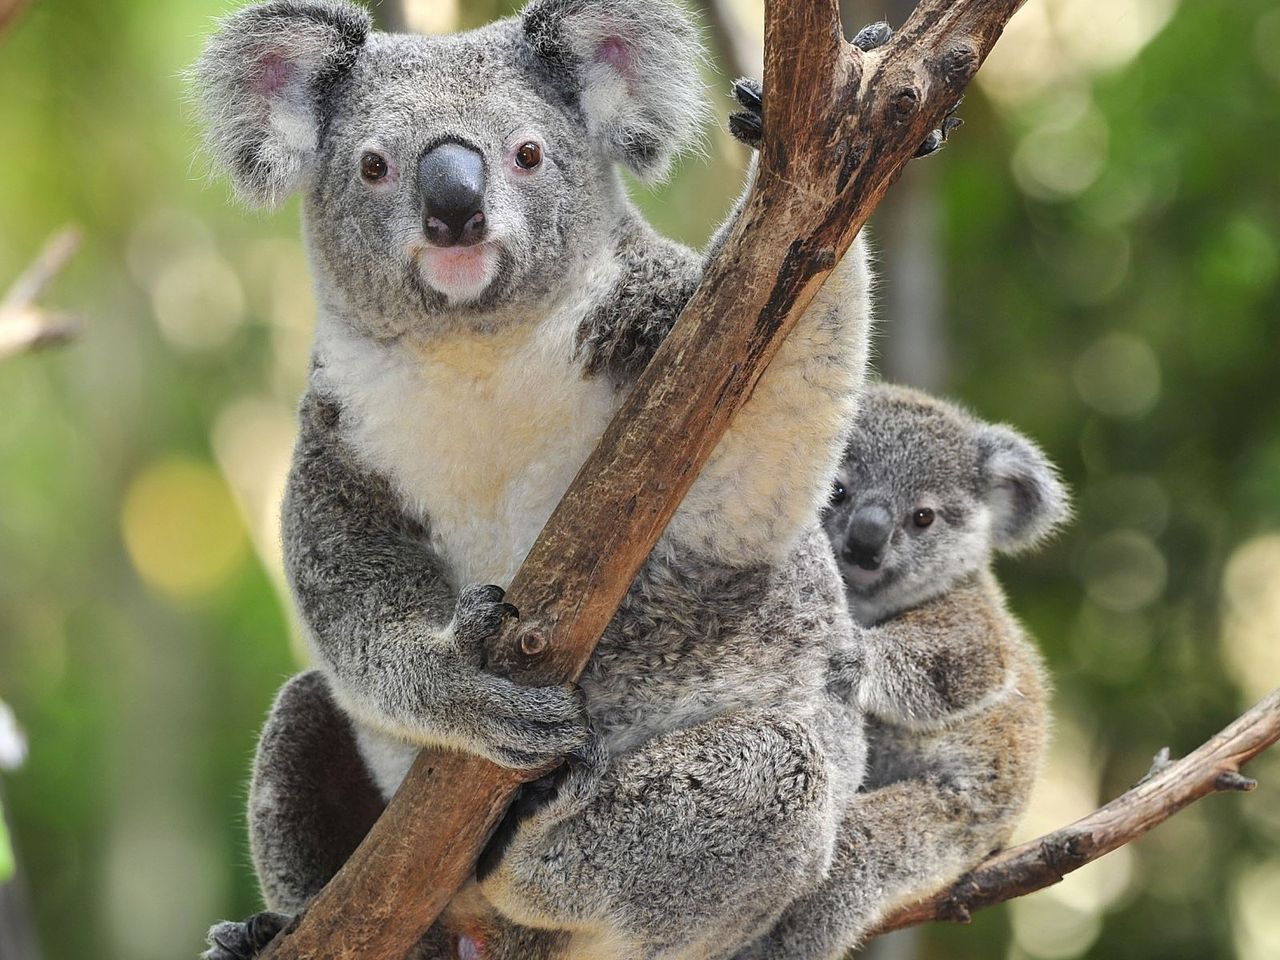 Some Australians Want To Rent Out Endangered Wildlife | Popular Science